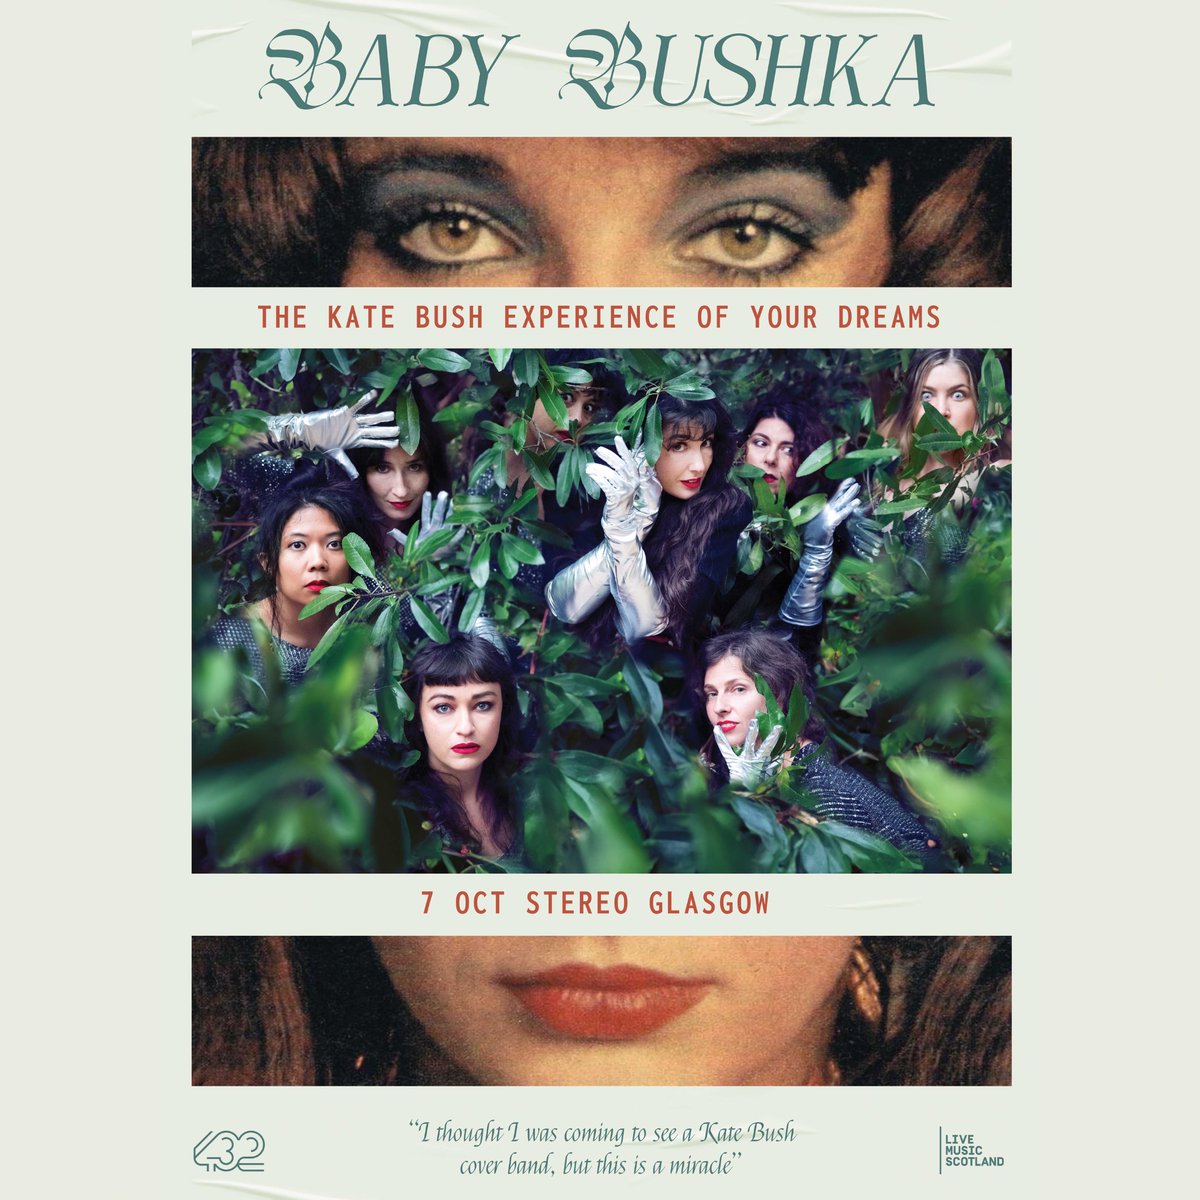 JUST ANNOUNCED! #BabyBushka are the eight-piece #KateBush experience of your dreams! They bring their joyous celebration of all things KB back to Glasgow for a magical night at @stereoglasgow on Mon 7 Oct! ✨ Tickets on sale Friday 19 April @ 8am 🎟 ➡ bit.ly/3JdL1yo